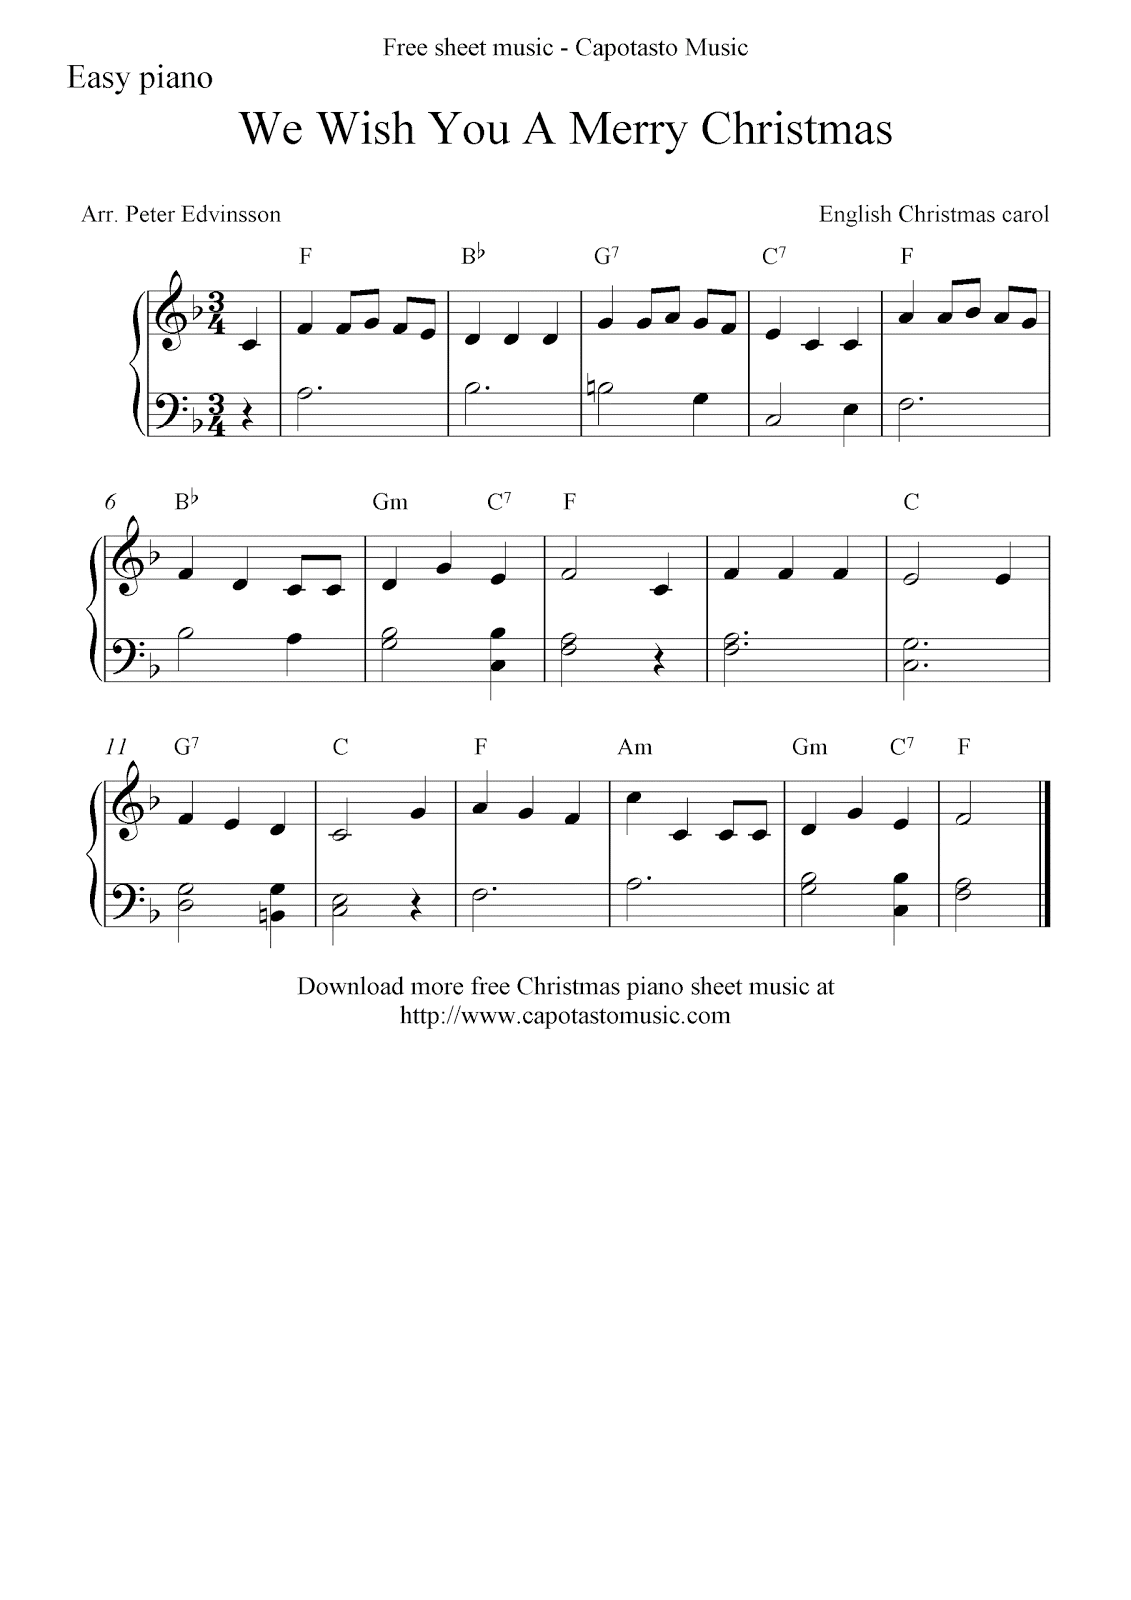 Easy Sheet Music For Beginners Free Christmas Sheet Music For Easy Piano We Wish You A Merry Christmas - Christmas Piano Sheet Music Easy Free Printable